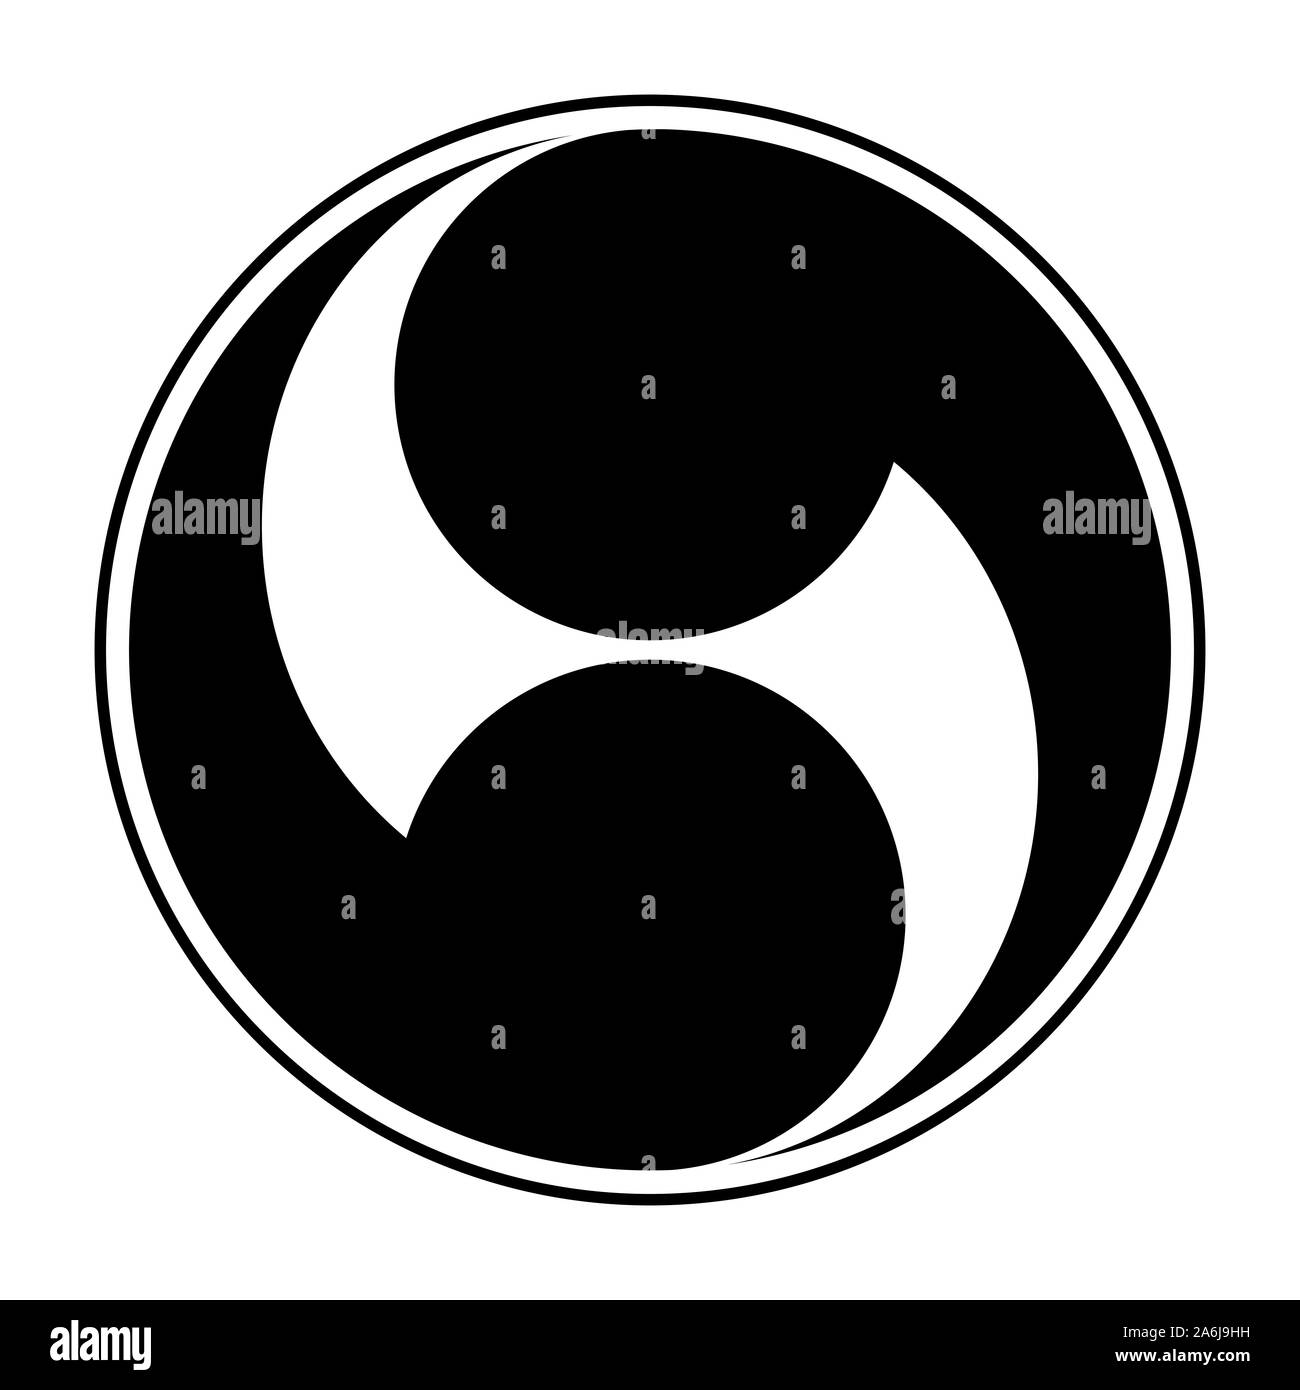 Tomoe symbol icon in a circle Stock Photo